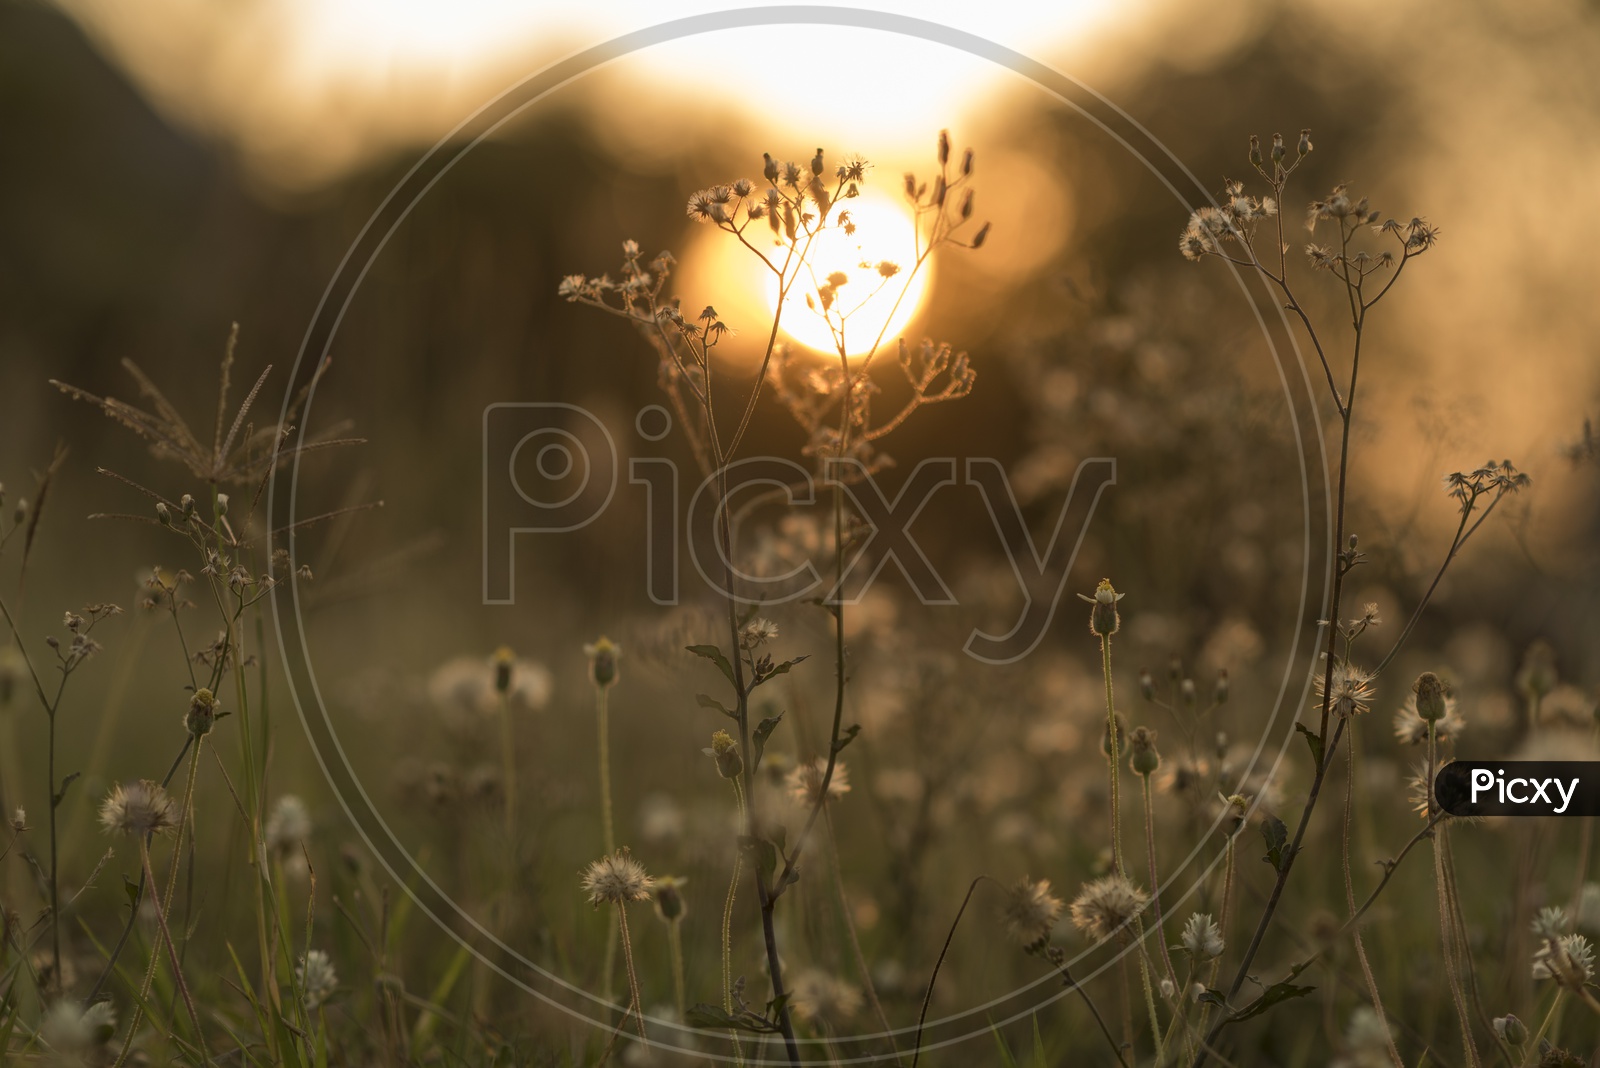 Garden Flowers With Sunset Background